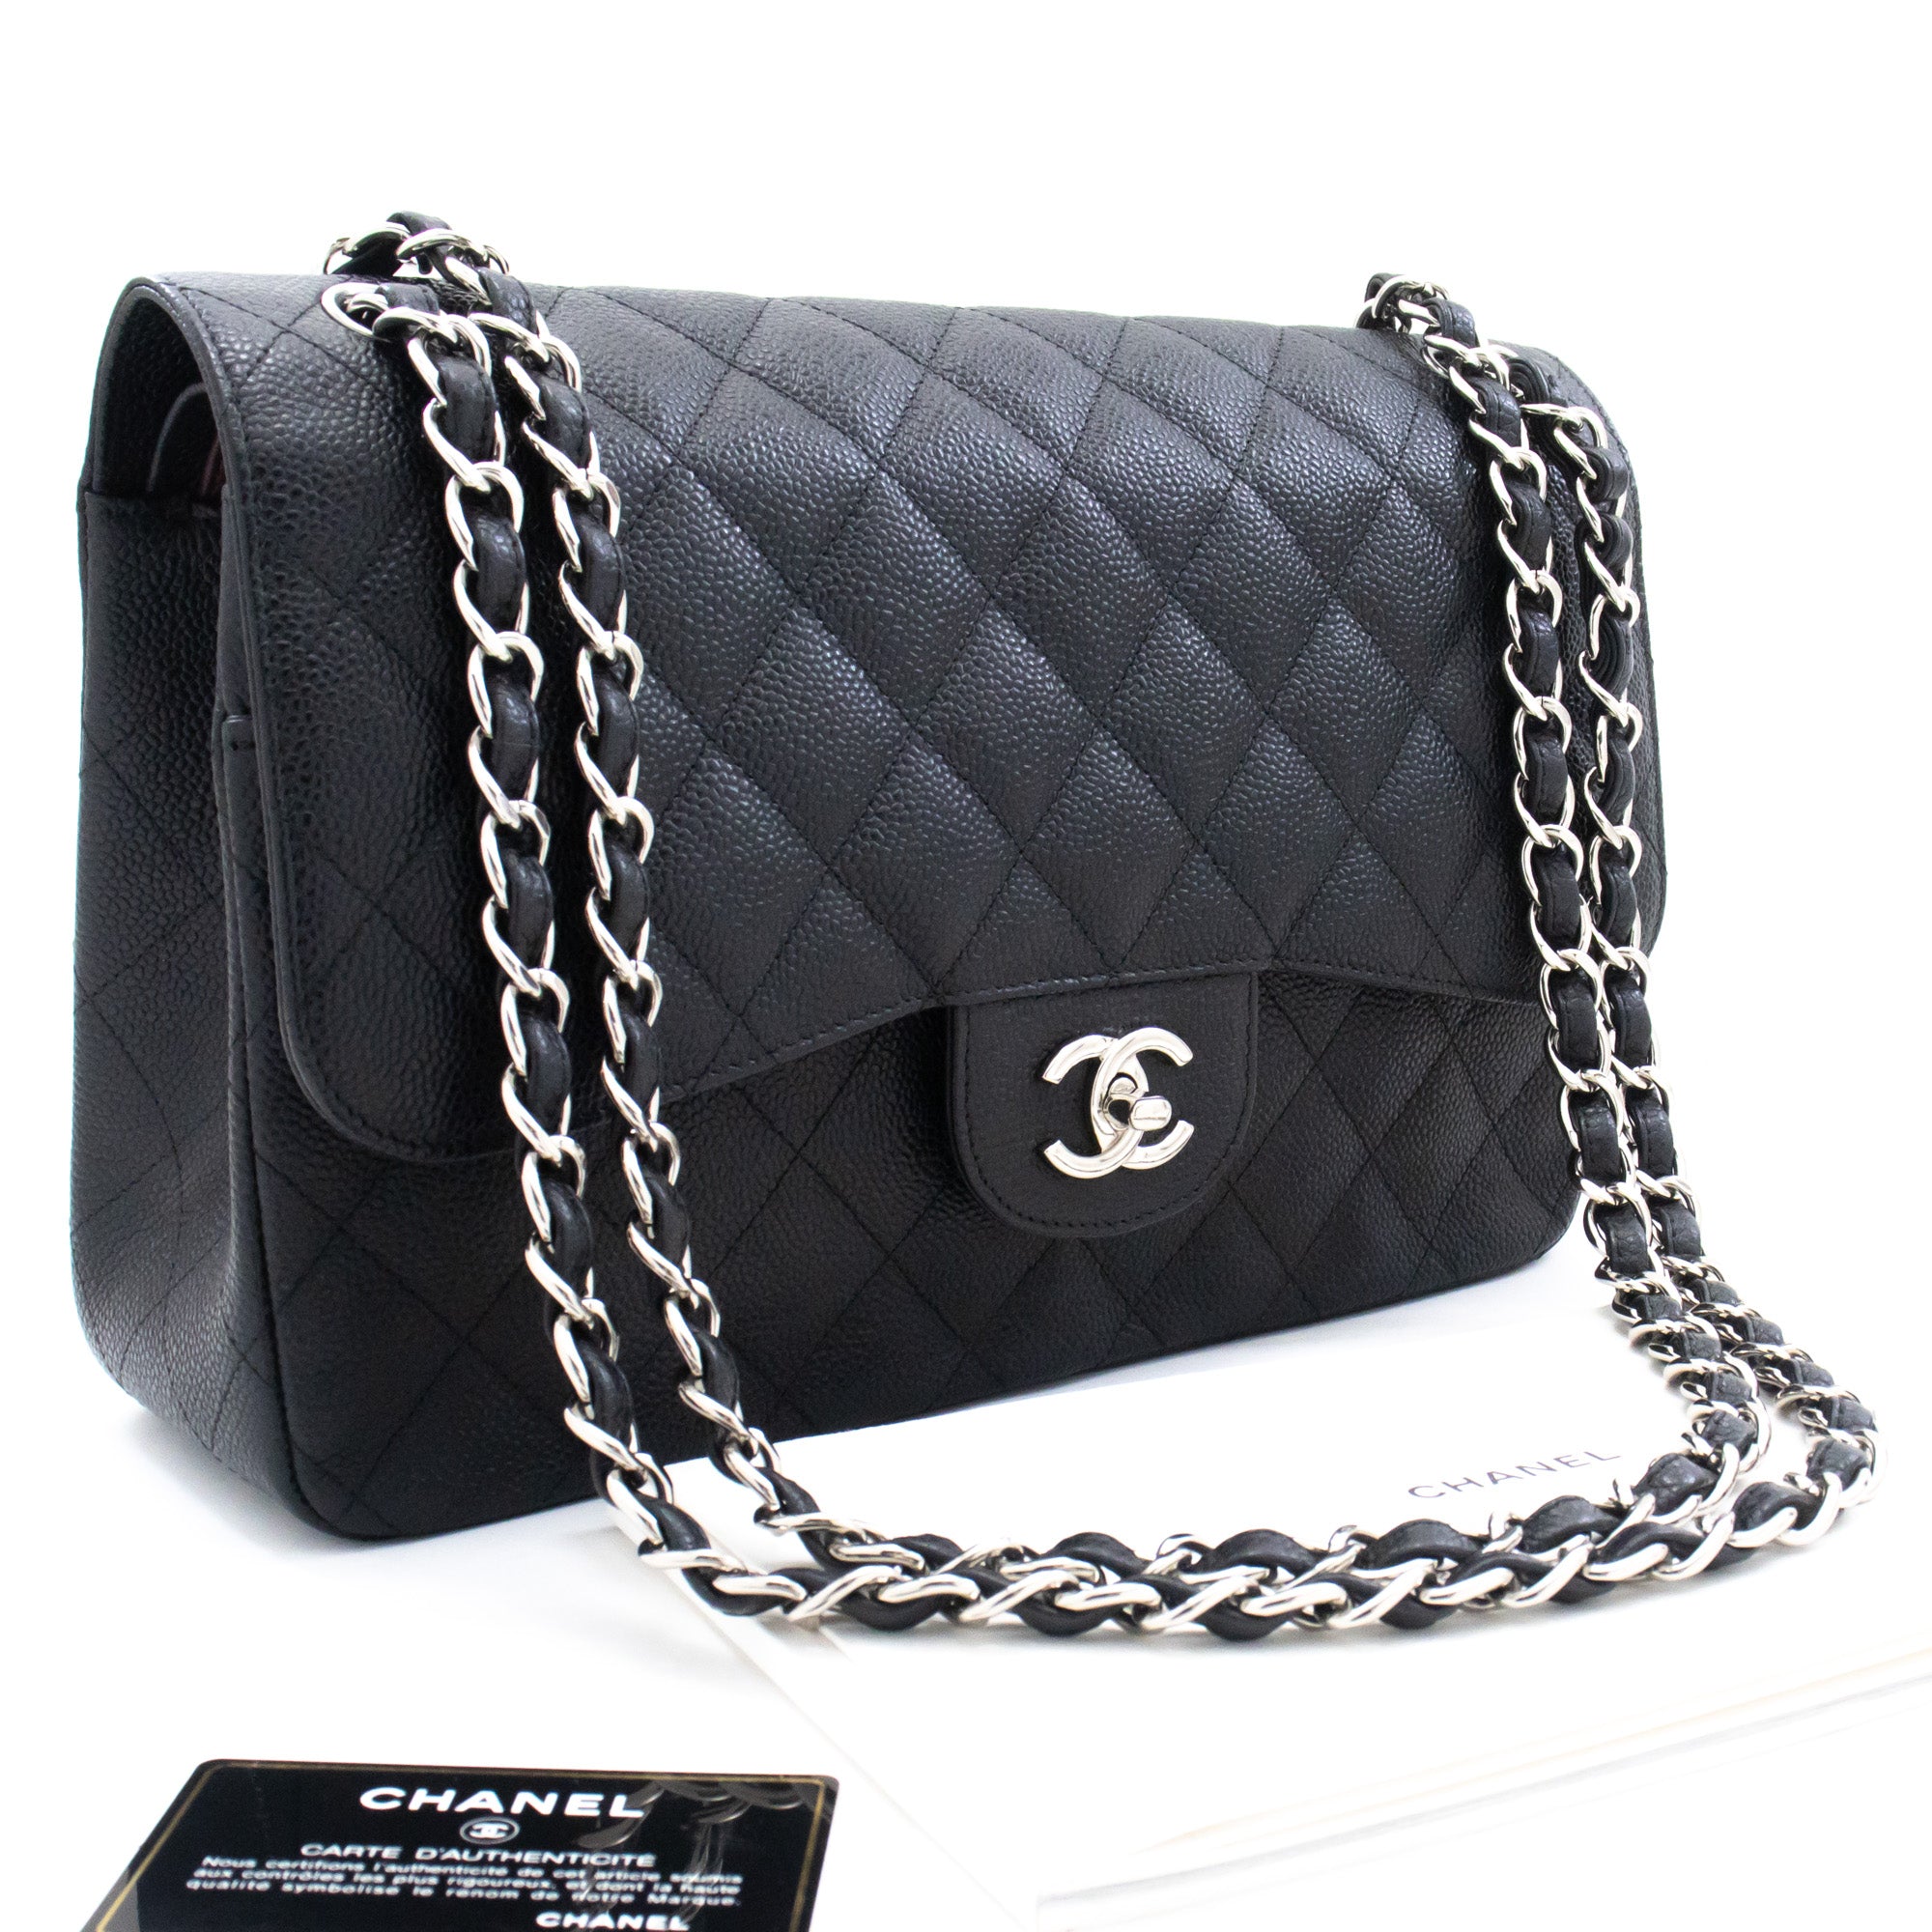 Authentic Chanel Black Caviar Leather Timeless Large Half Moon Flap Bag